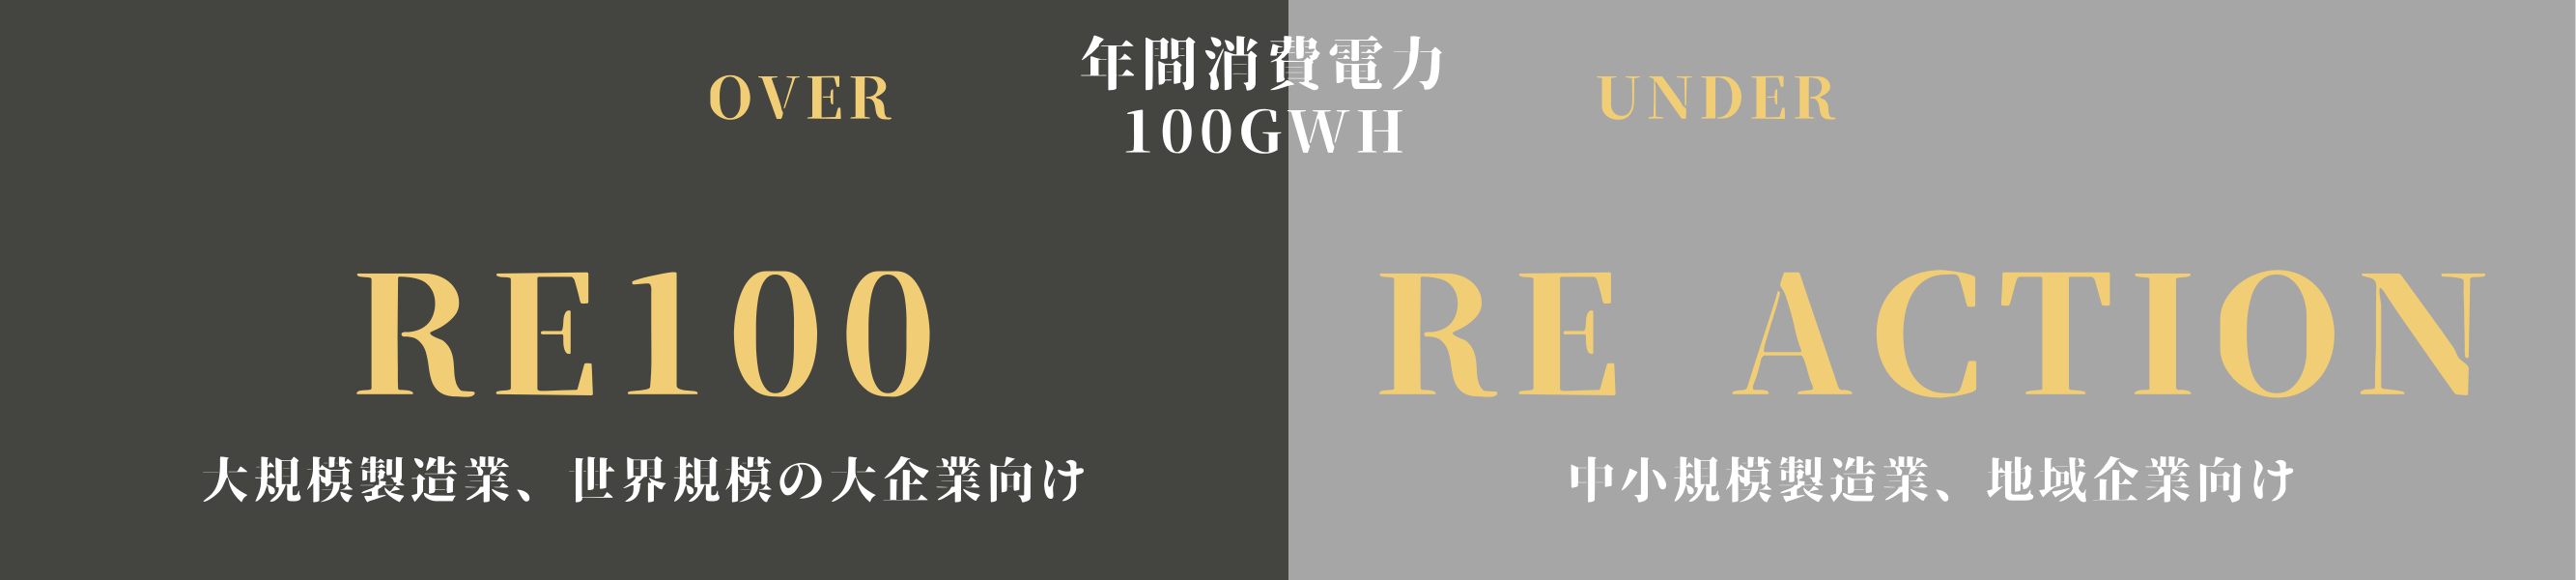 RE100、REActionの加盟基準